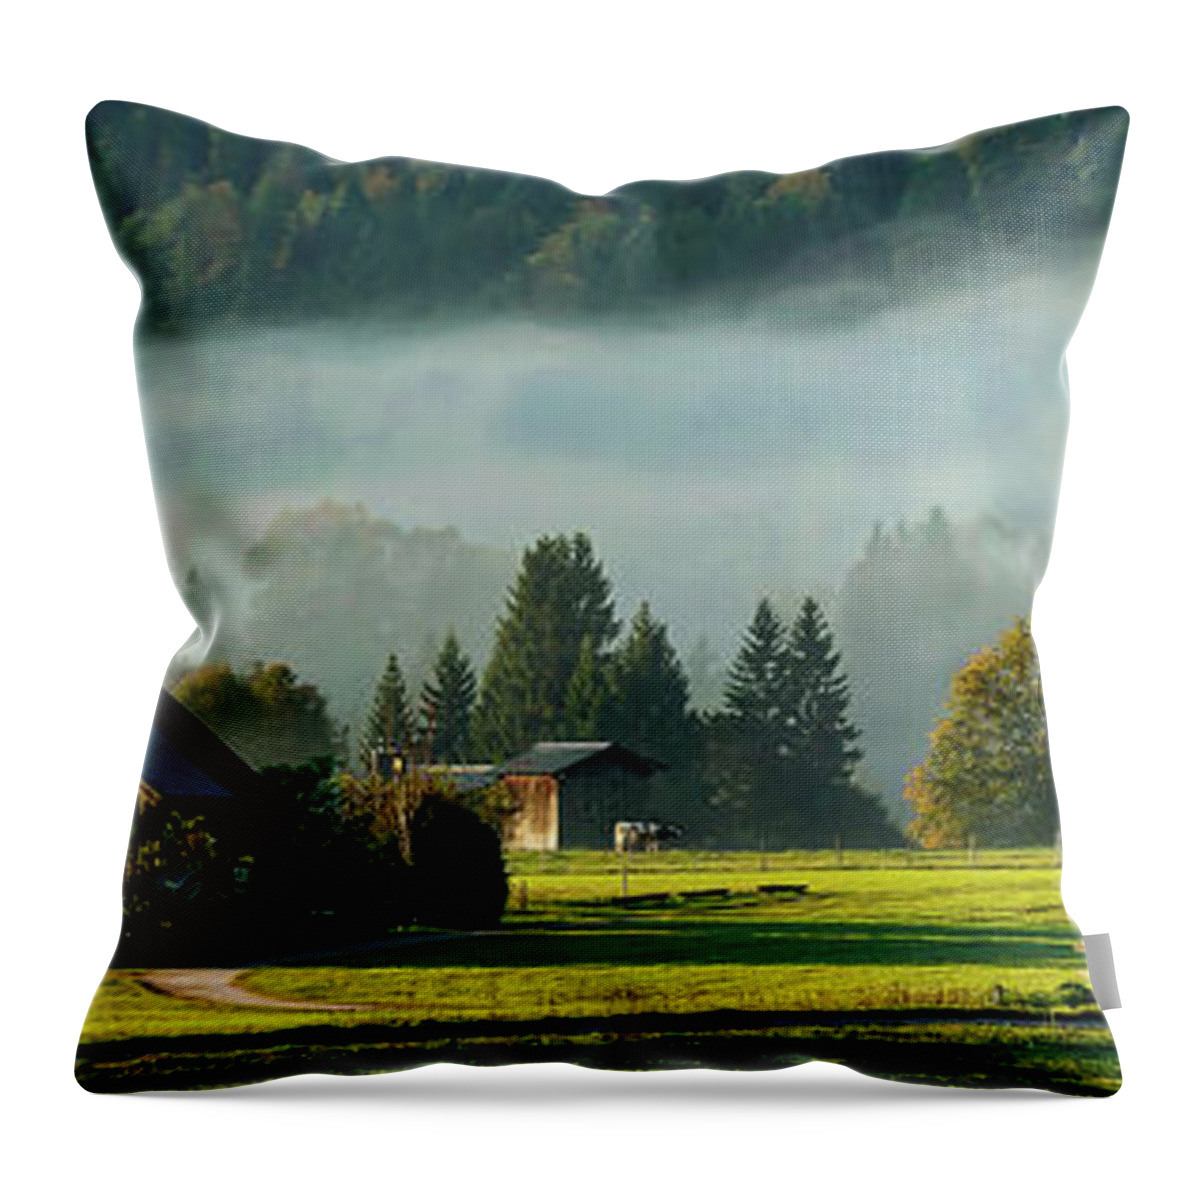 Germany Throw Pillow featuring the photograph An Autumn Morning In Germany #1 by Mountain Dreams